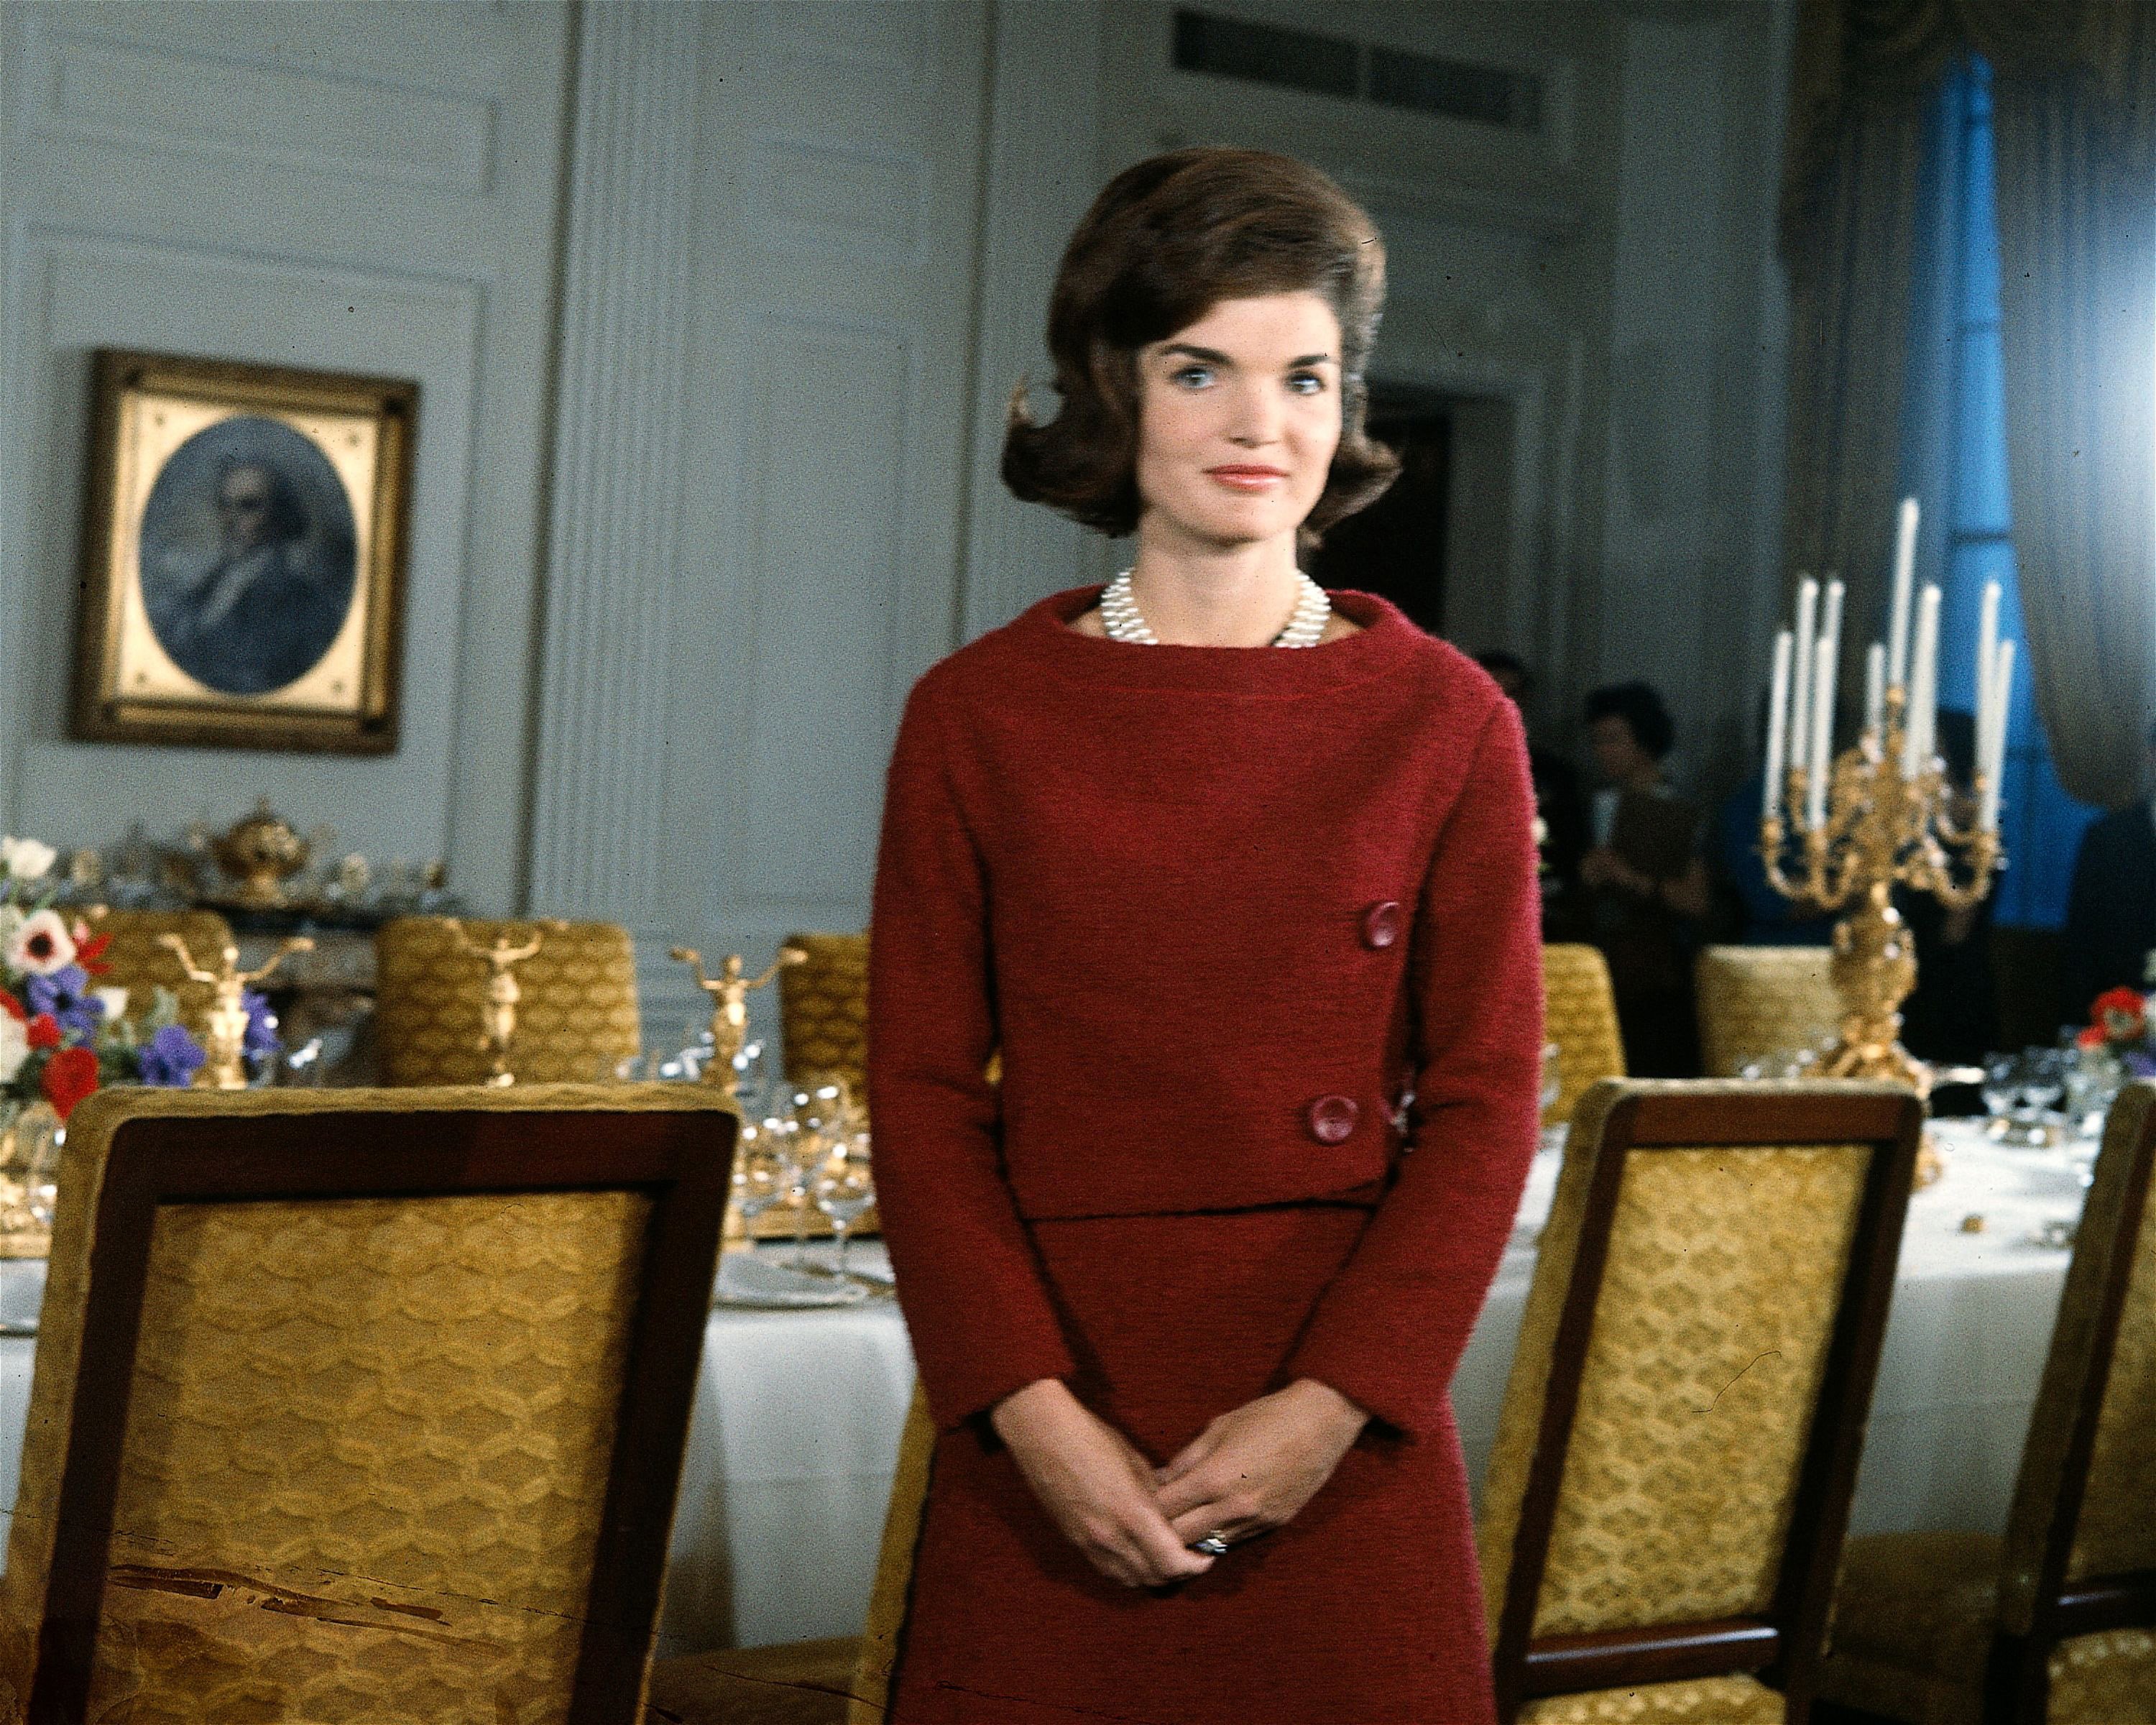 The Fascinating History Behind Jackie Kennedy's Pink Suit - Chanel Suit JFK  Assassination